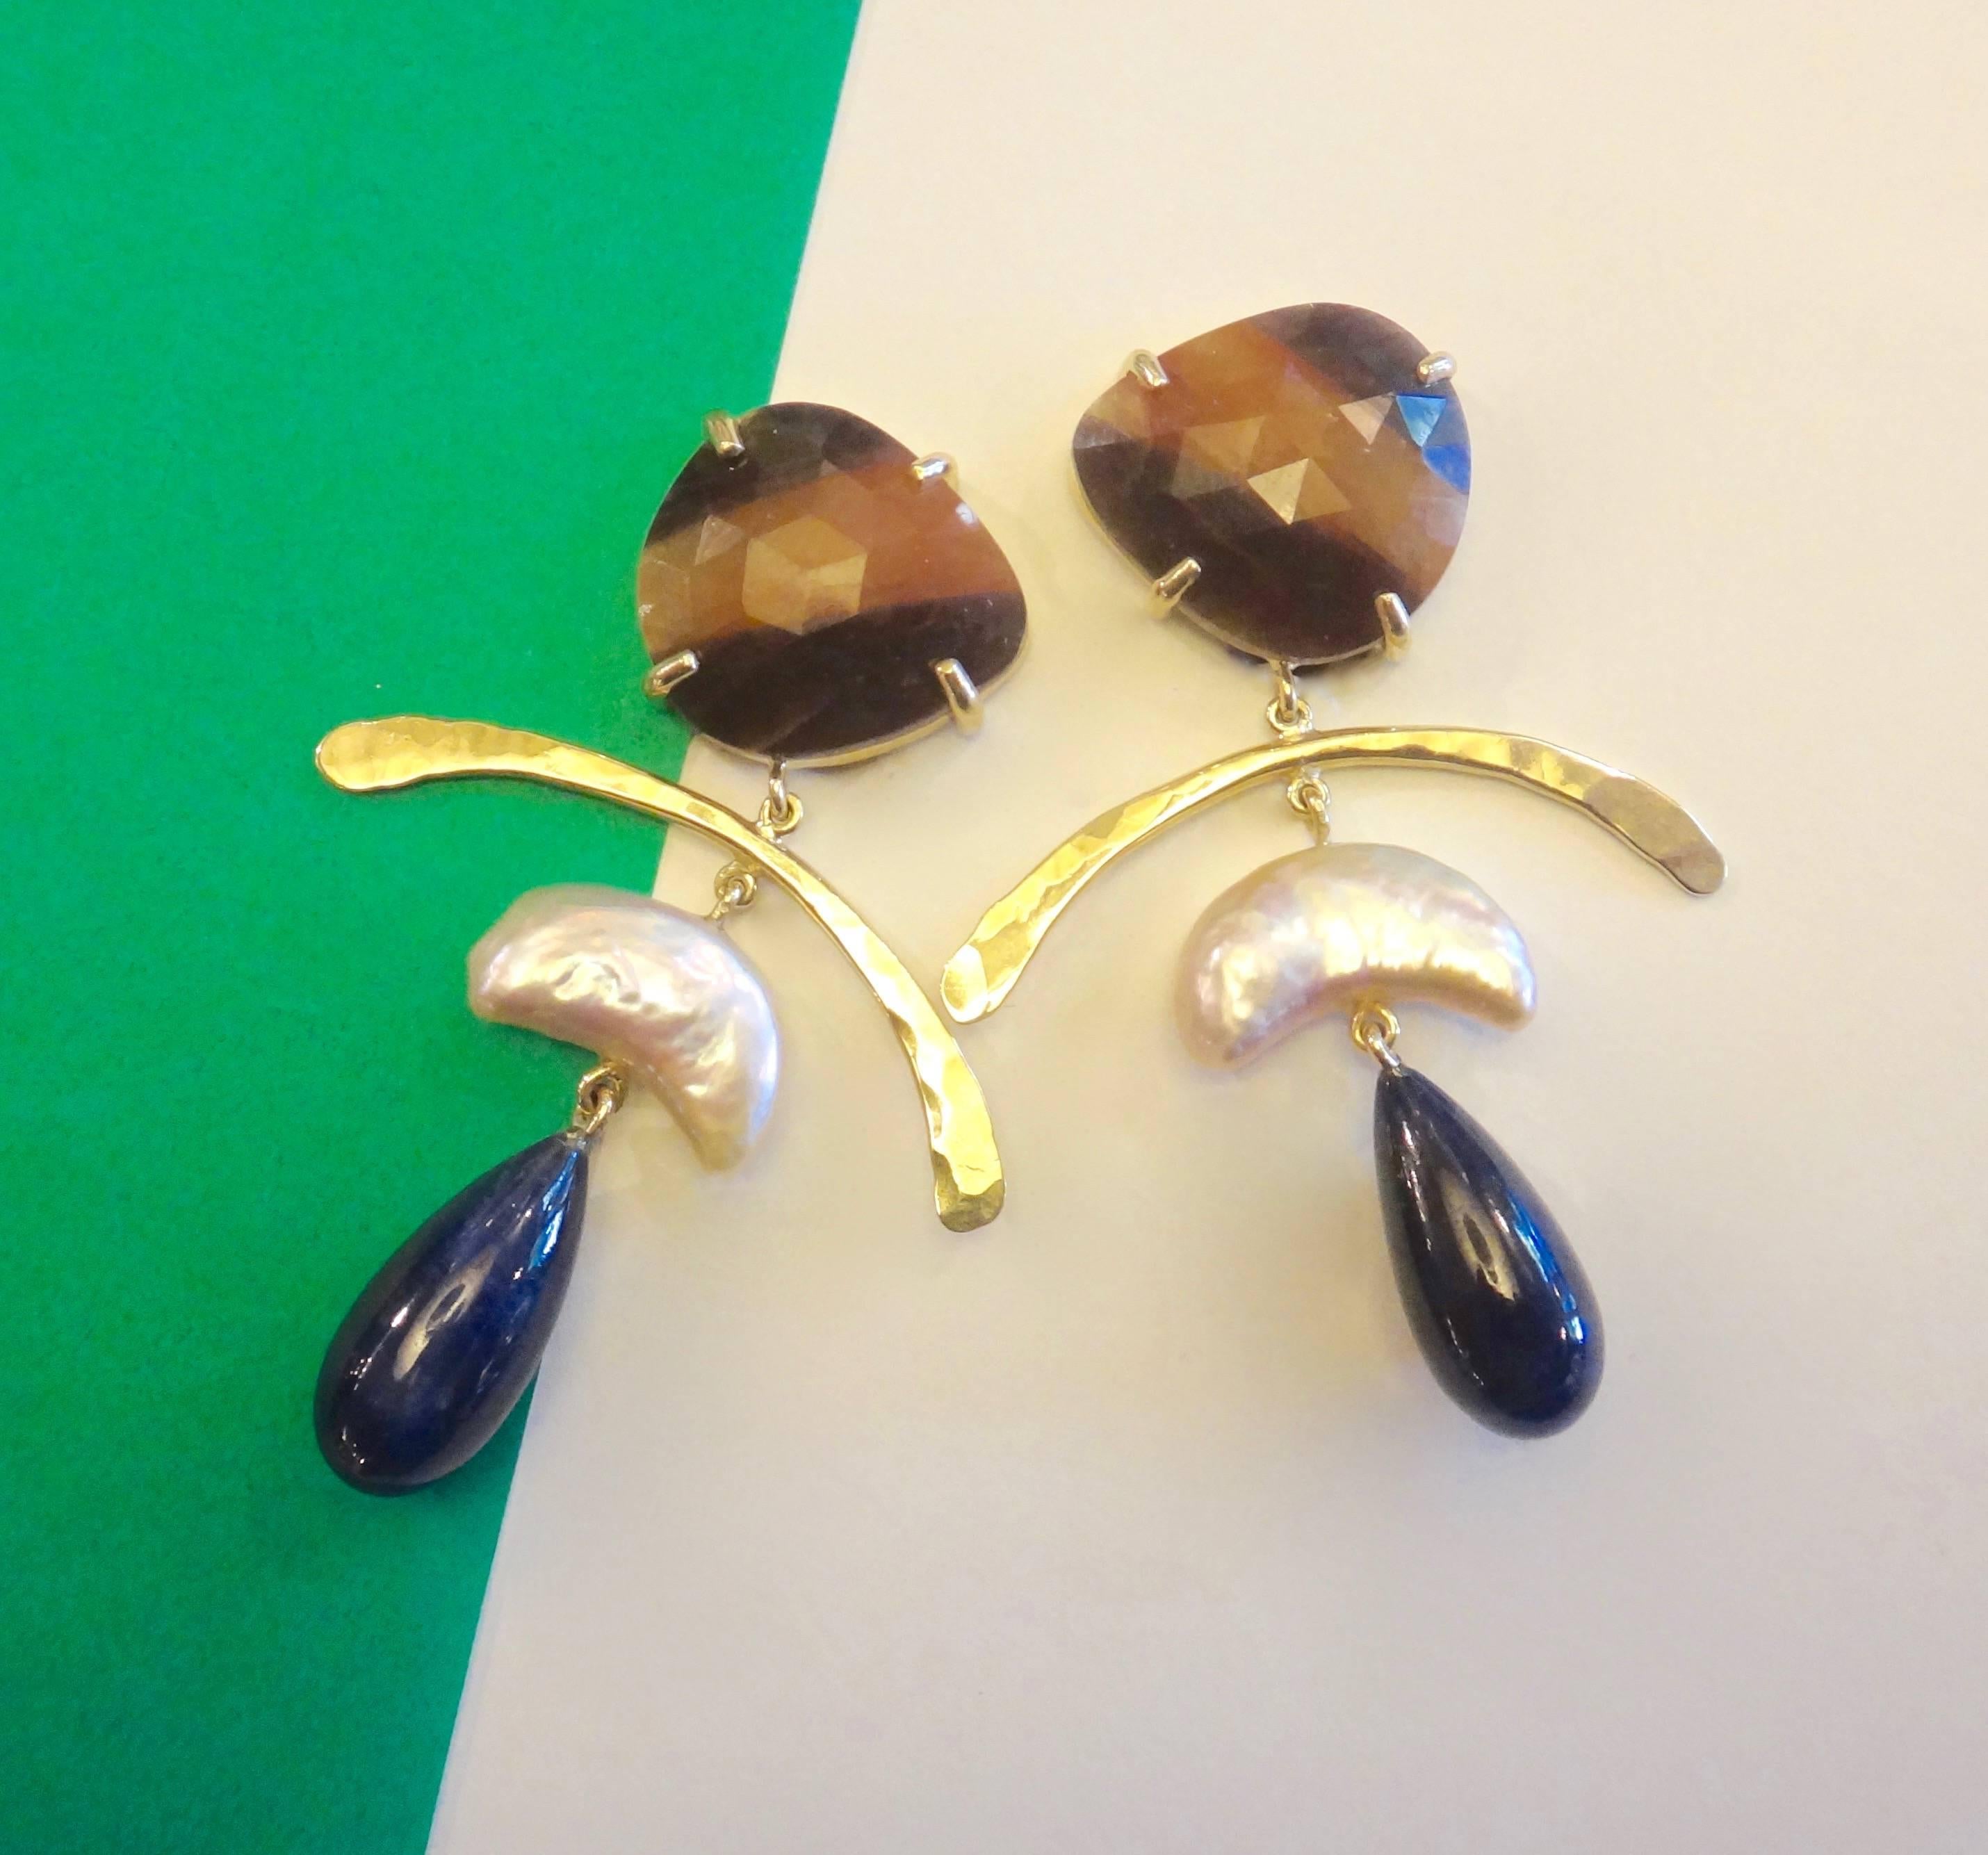 Faceted sapphire with bands of chocolate brown and gold are combined with  half moon shaped cultured pearls and blue sapphire drops in this mobile earrings.  All are set in fabricated and forged 18k yellow gold.  Posts with omega clip backs.  